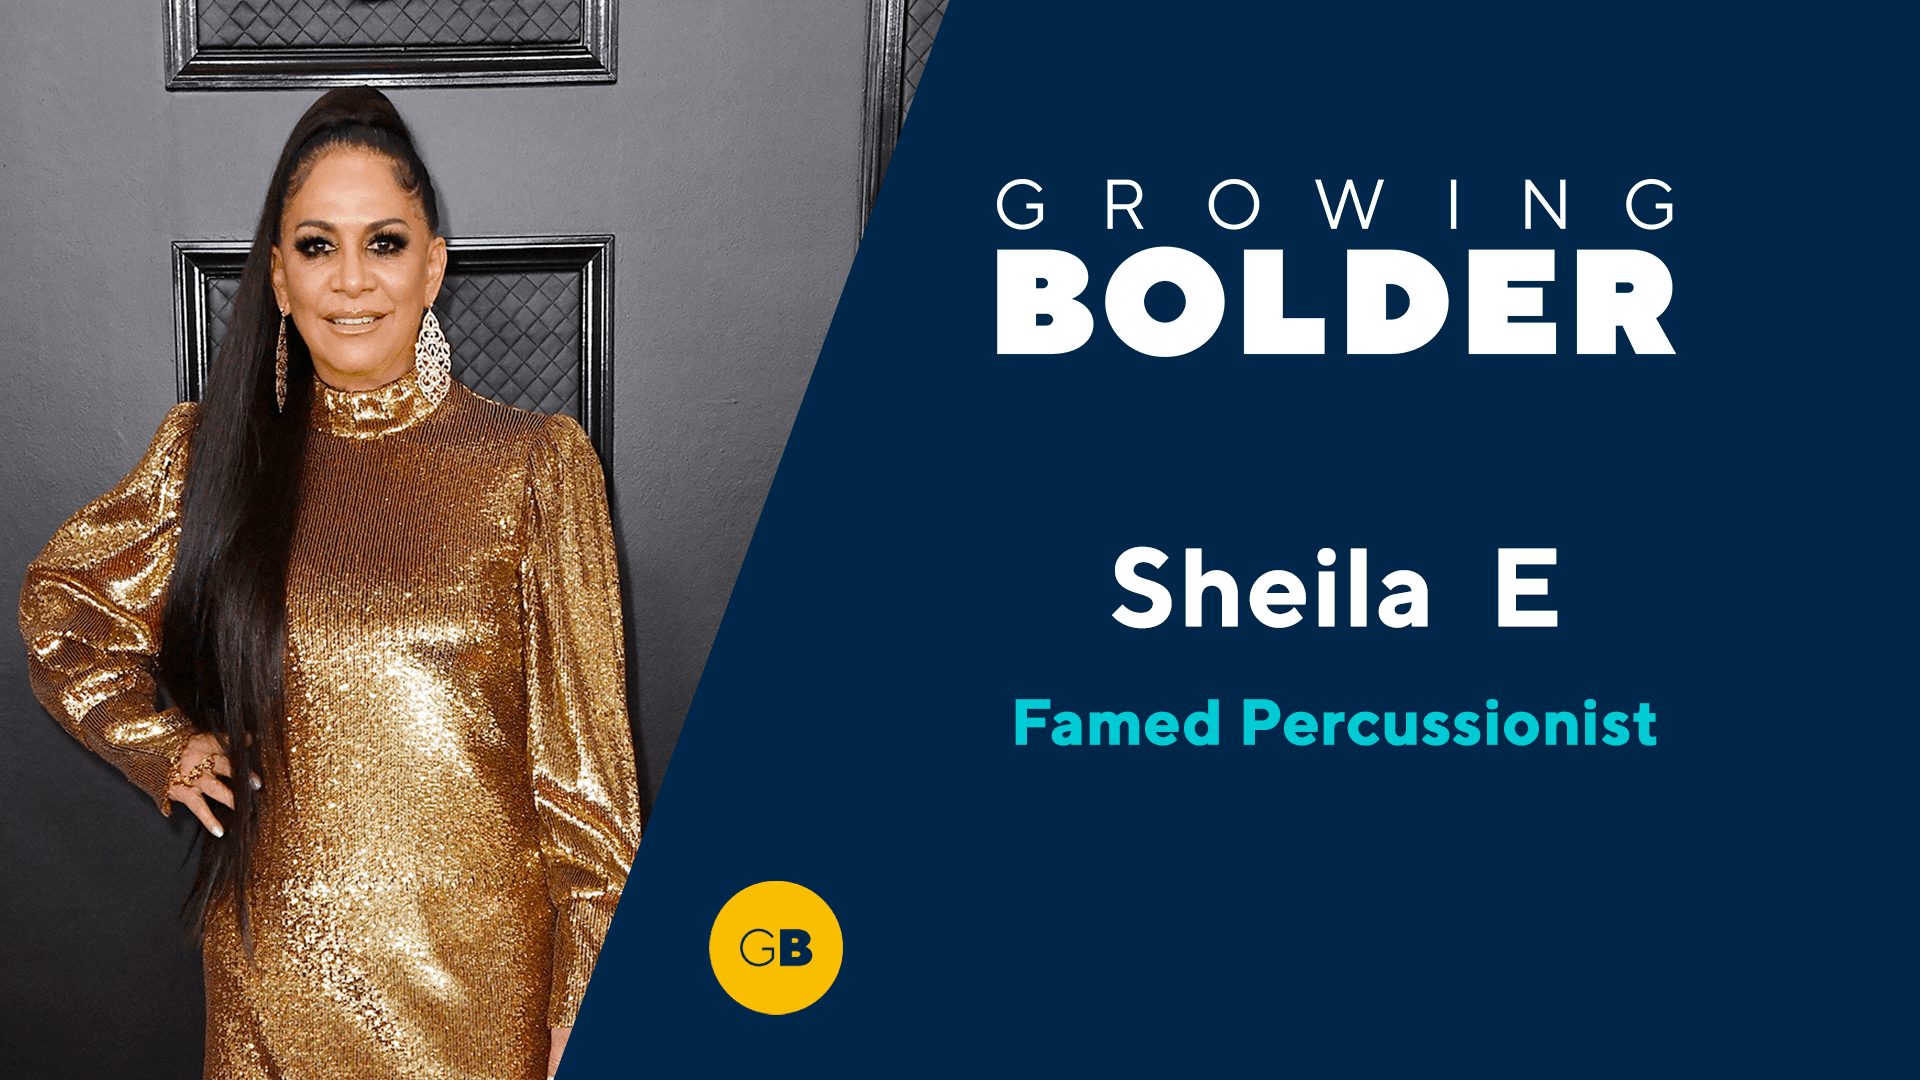 Sheila E's Passion for Paying it Forward